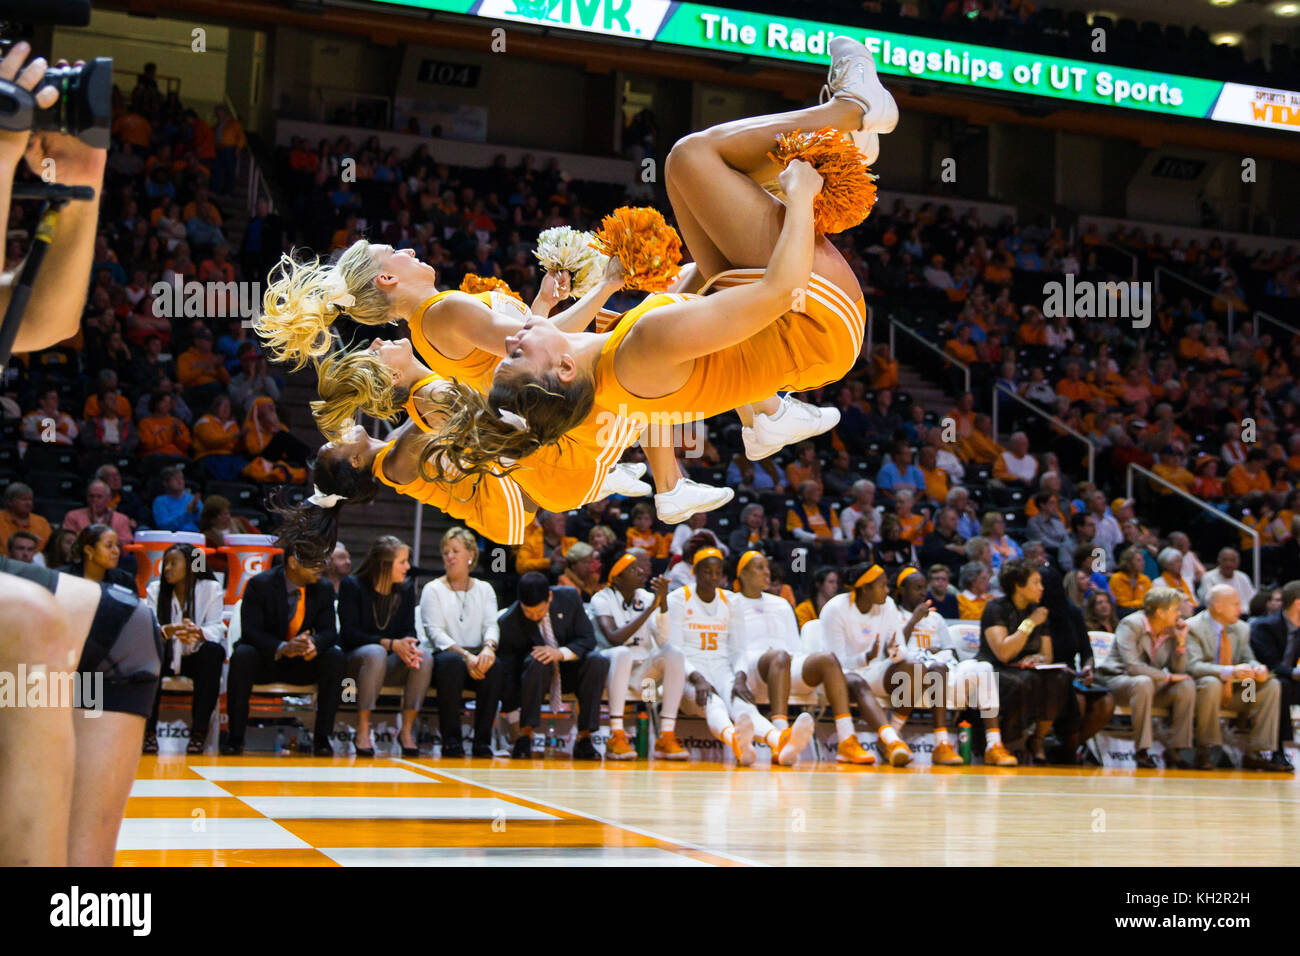 November 12, 2017: Tennessee Lady Volunteers cheerleaders during the NCAA basketball game between the University of Tennessee Lady Volunteers and the East Tennessee State University Lady Bucs at Thompson Boling Arena in Knoxville TN Tim Gangloff/CSM Stock Photo